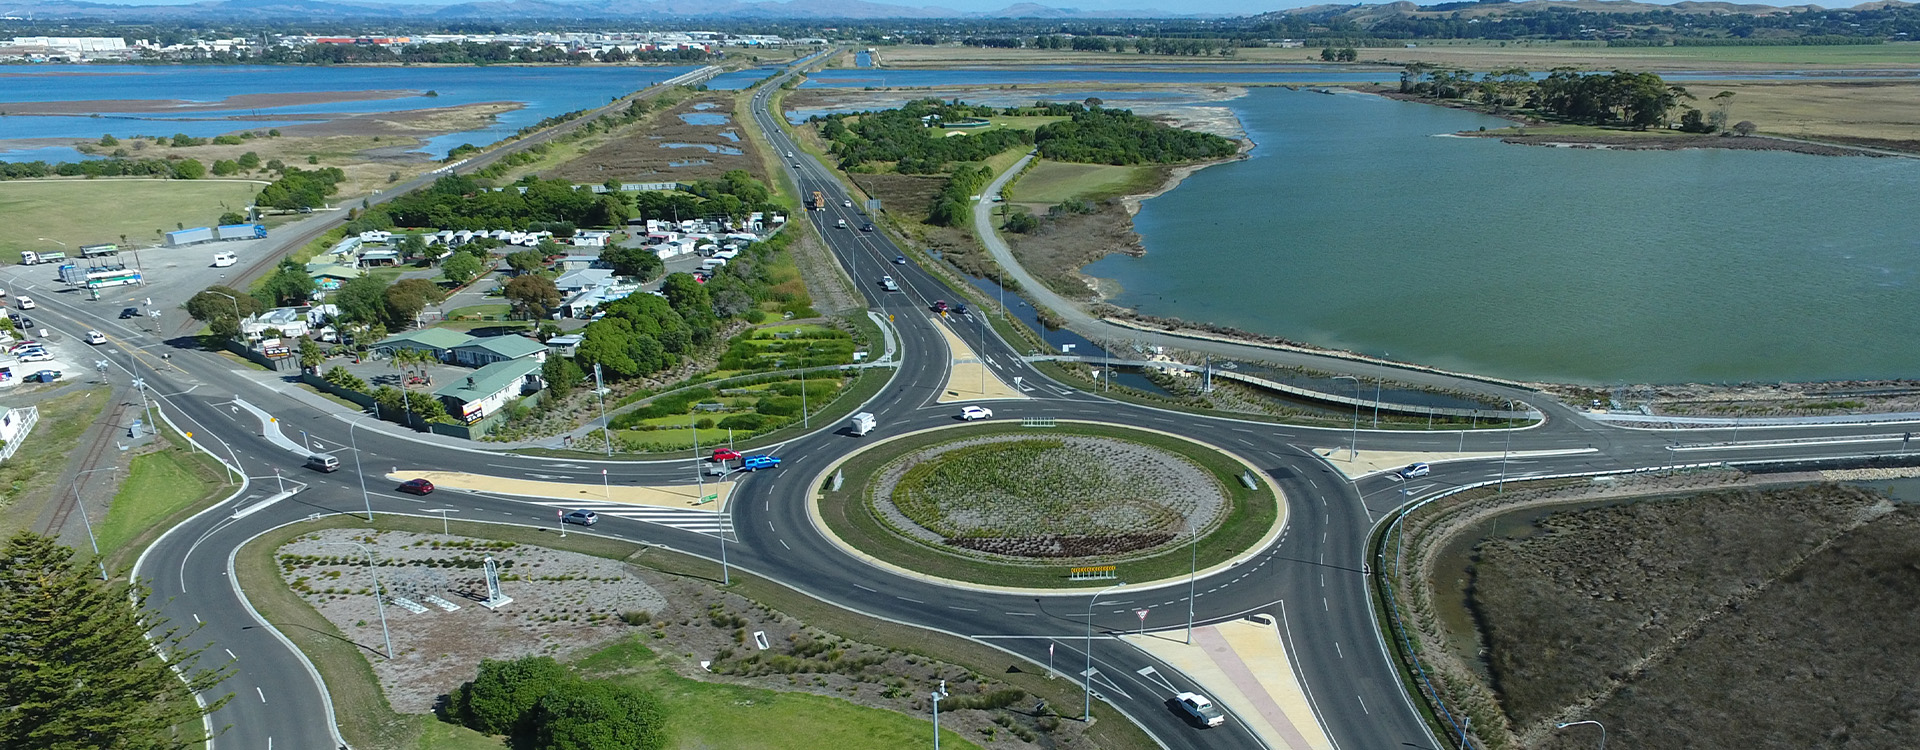 bnr-hawkes-bay-roundabout